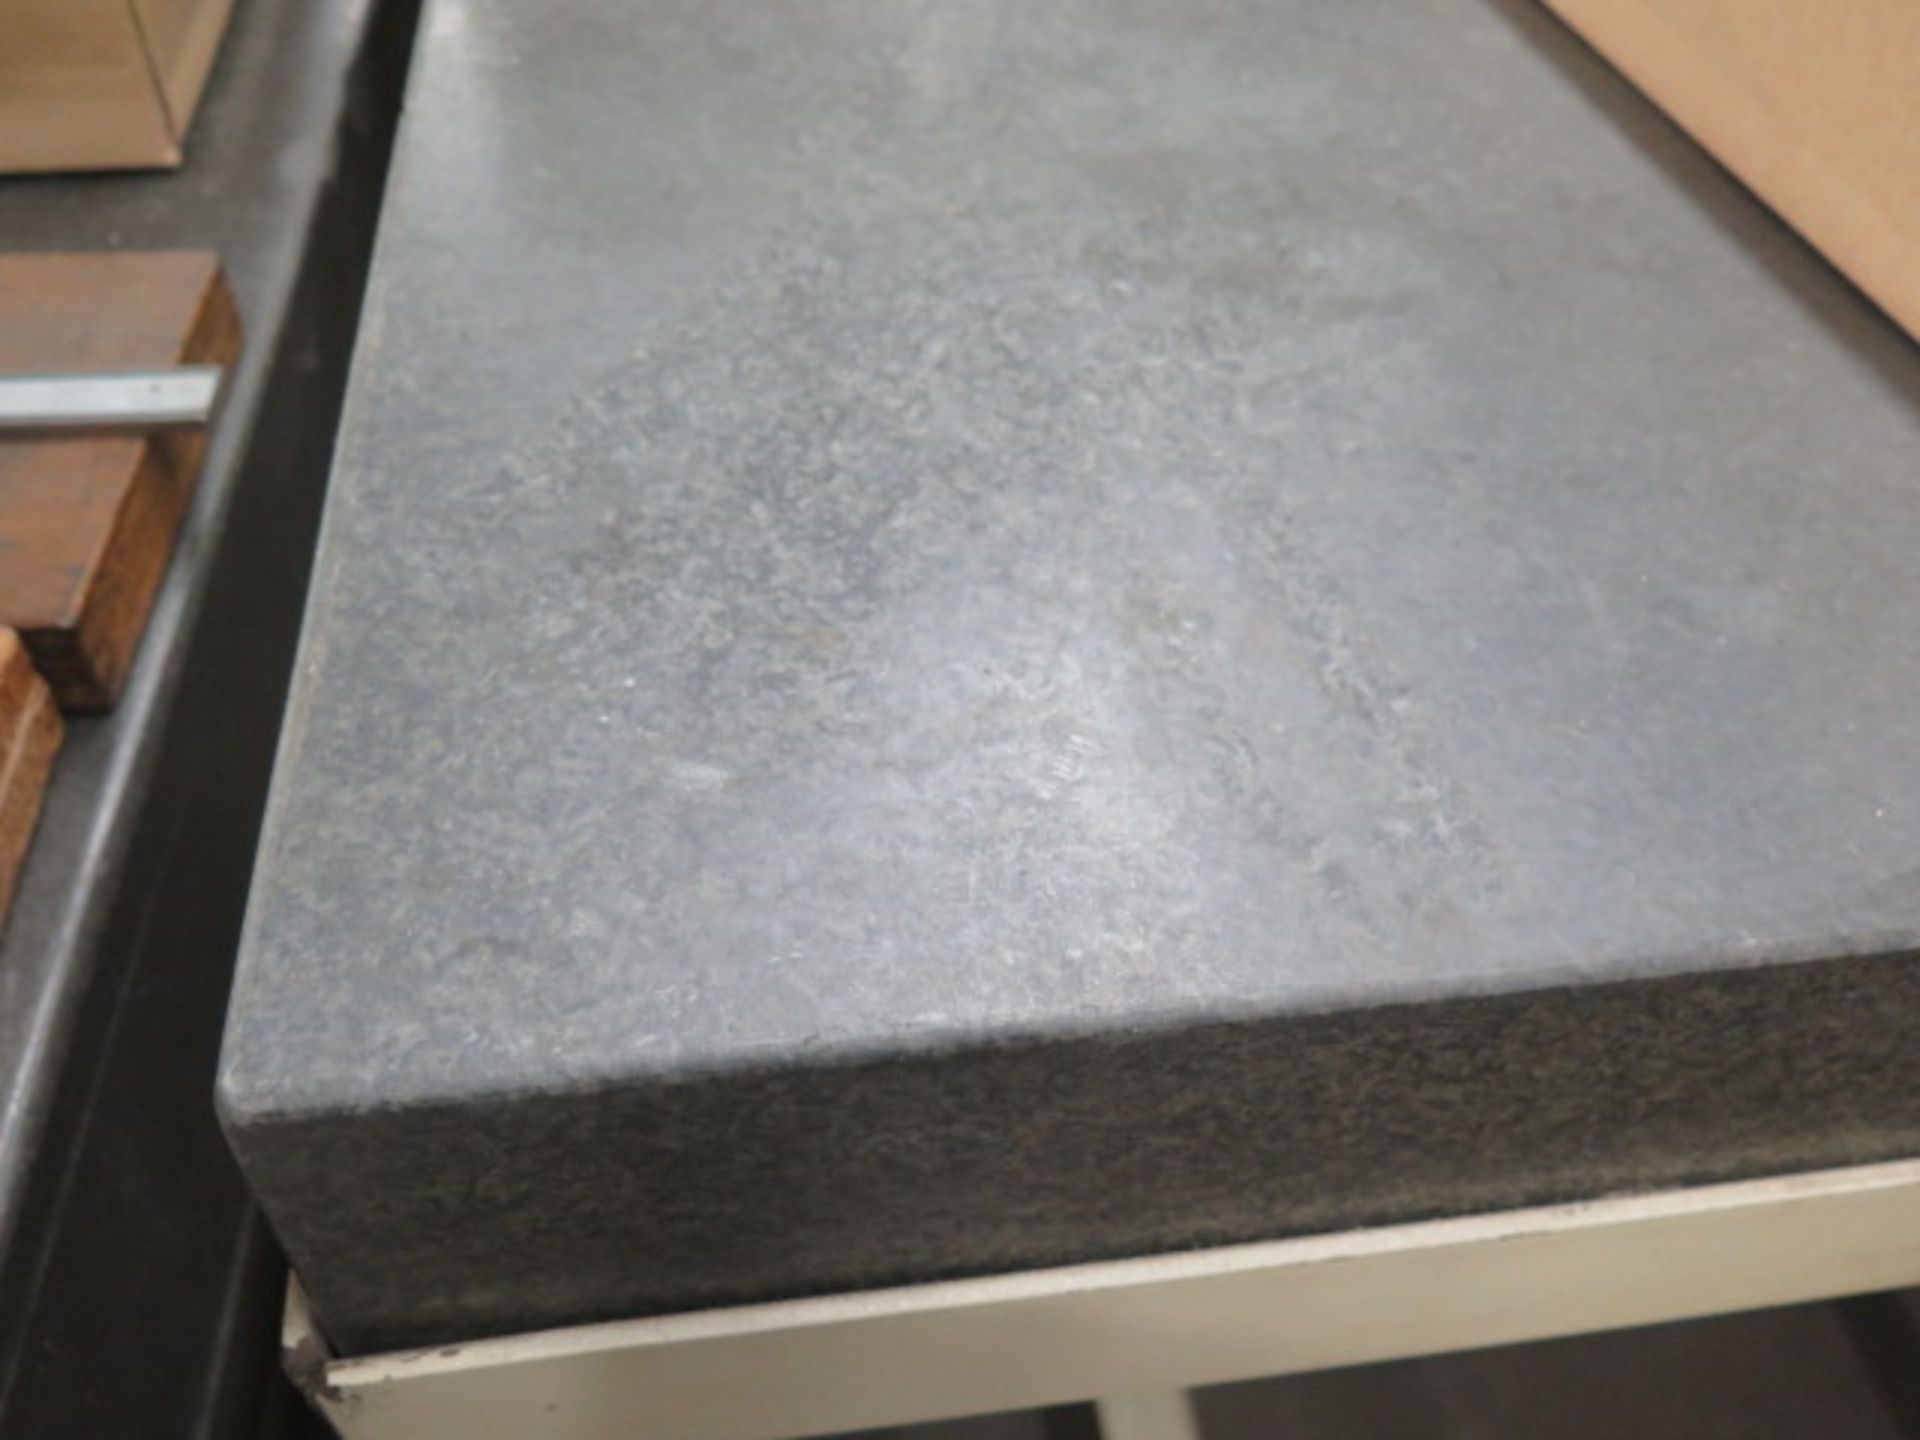 36" x 48" x 4" Granite Surface Plate w/ Stand - Image 2 of 3